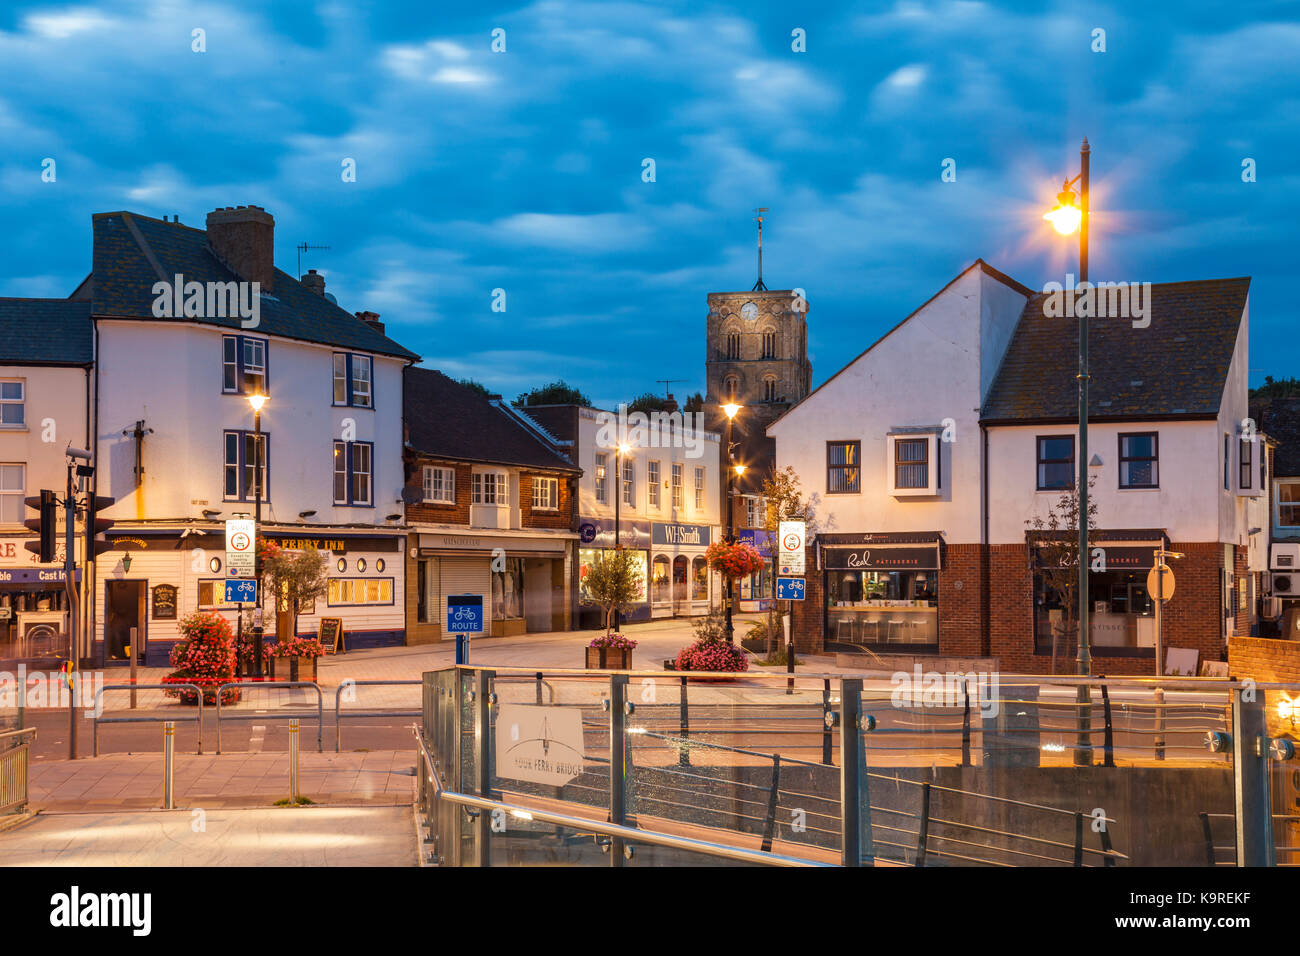 Abend in Shoreham-by-Sea, West Sussex, England. Stockfoto